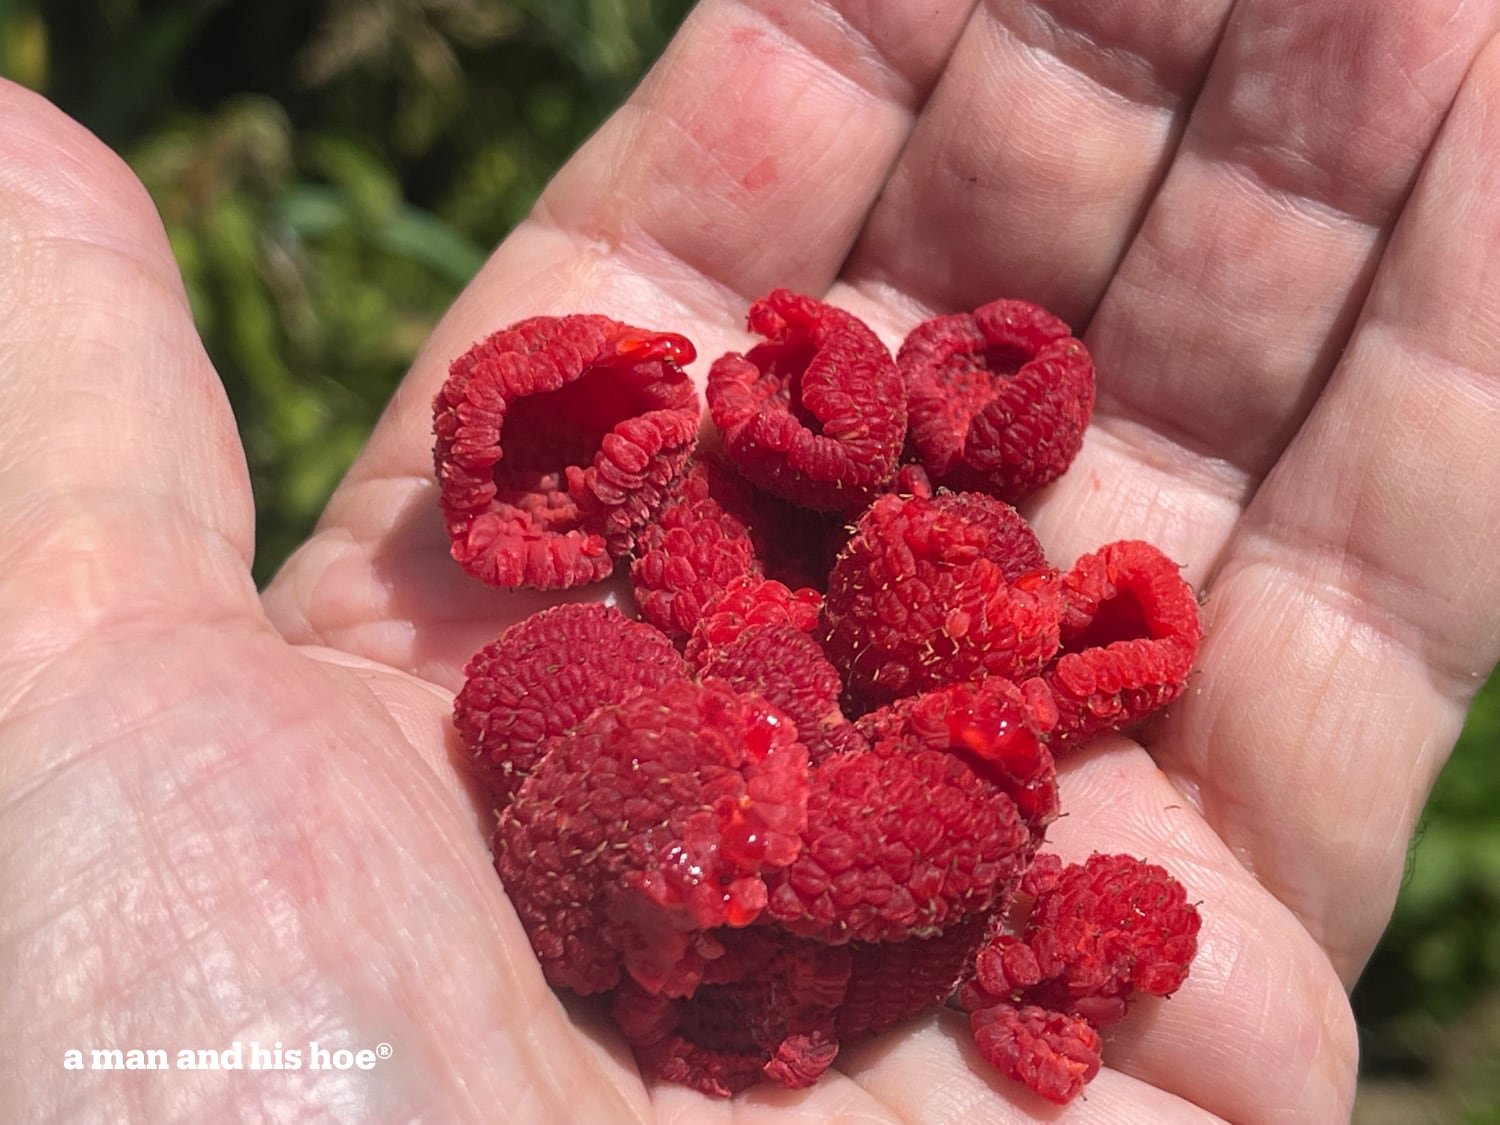 Thimble berries in the hand